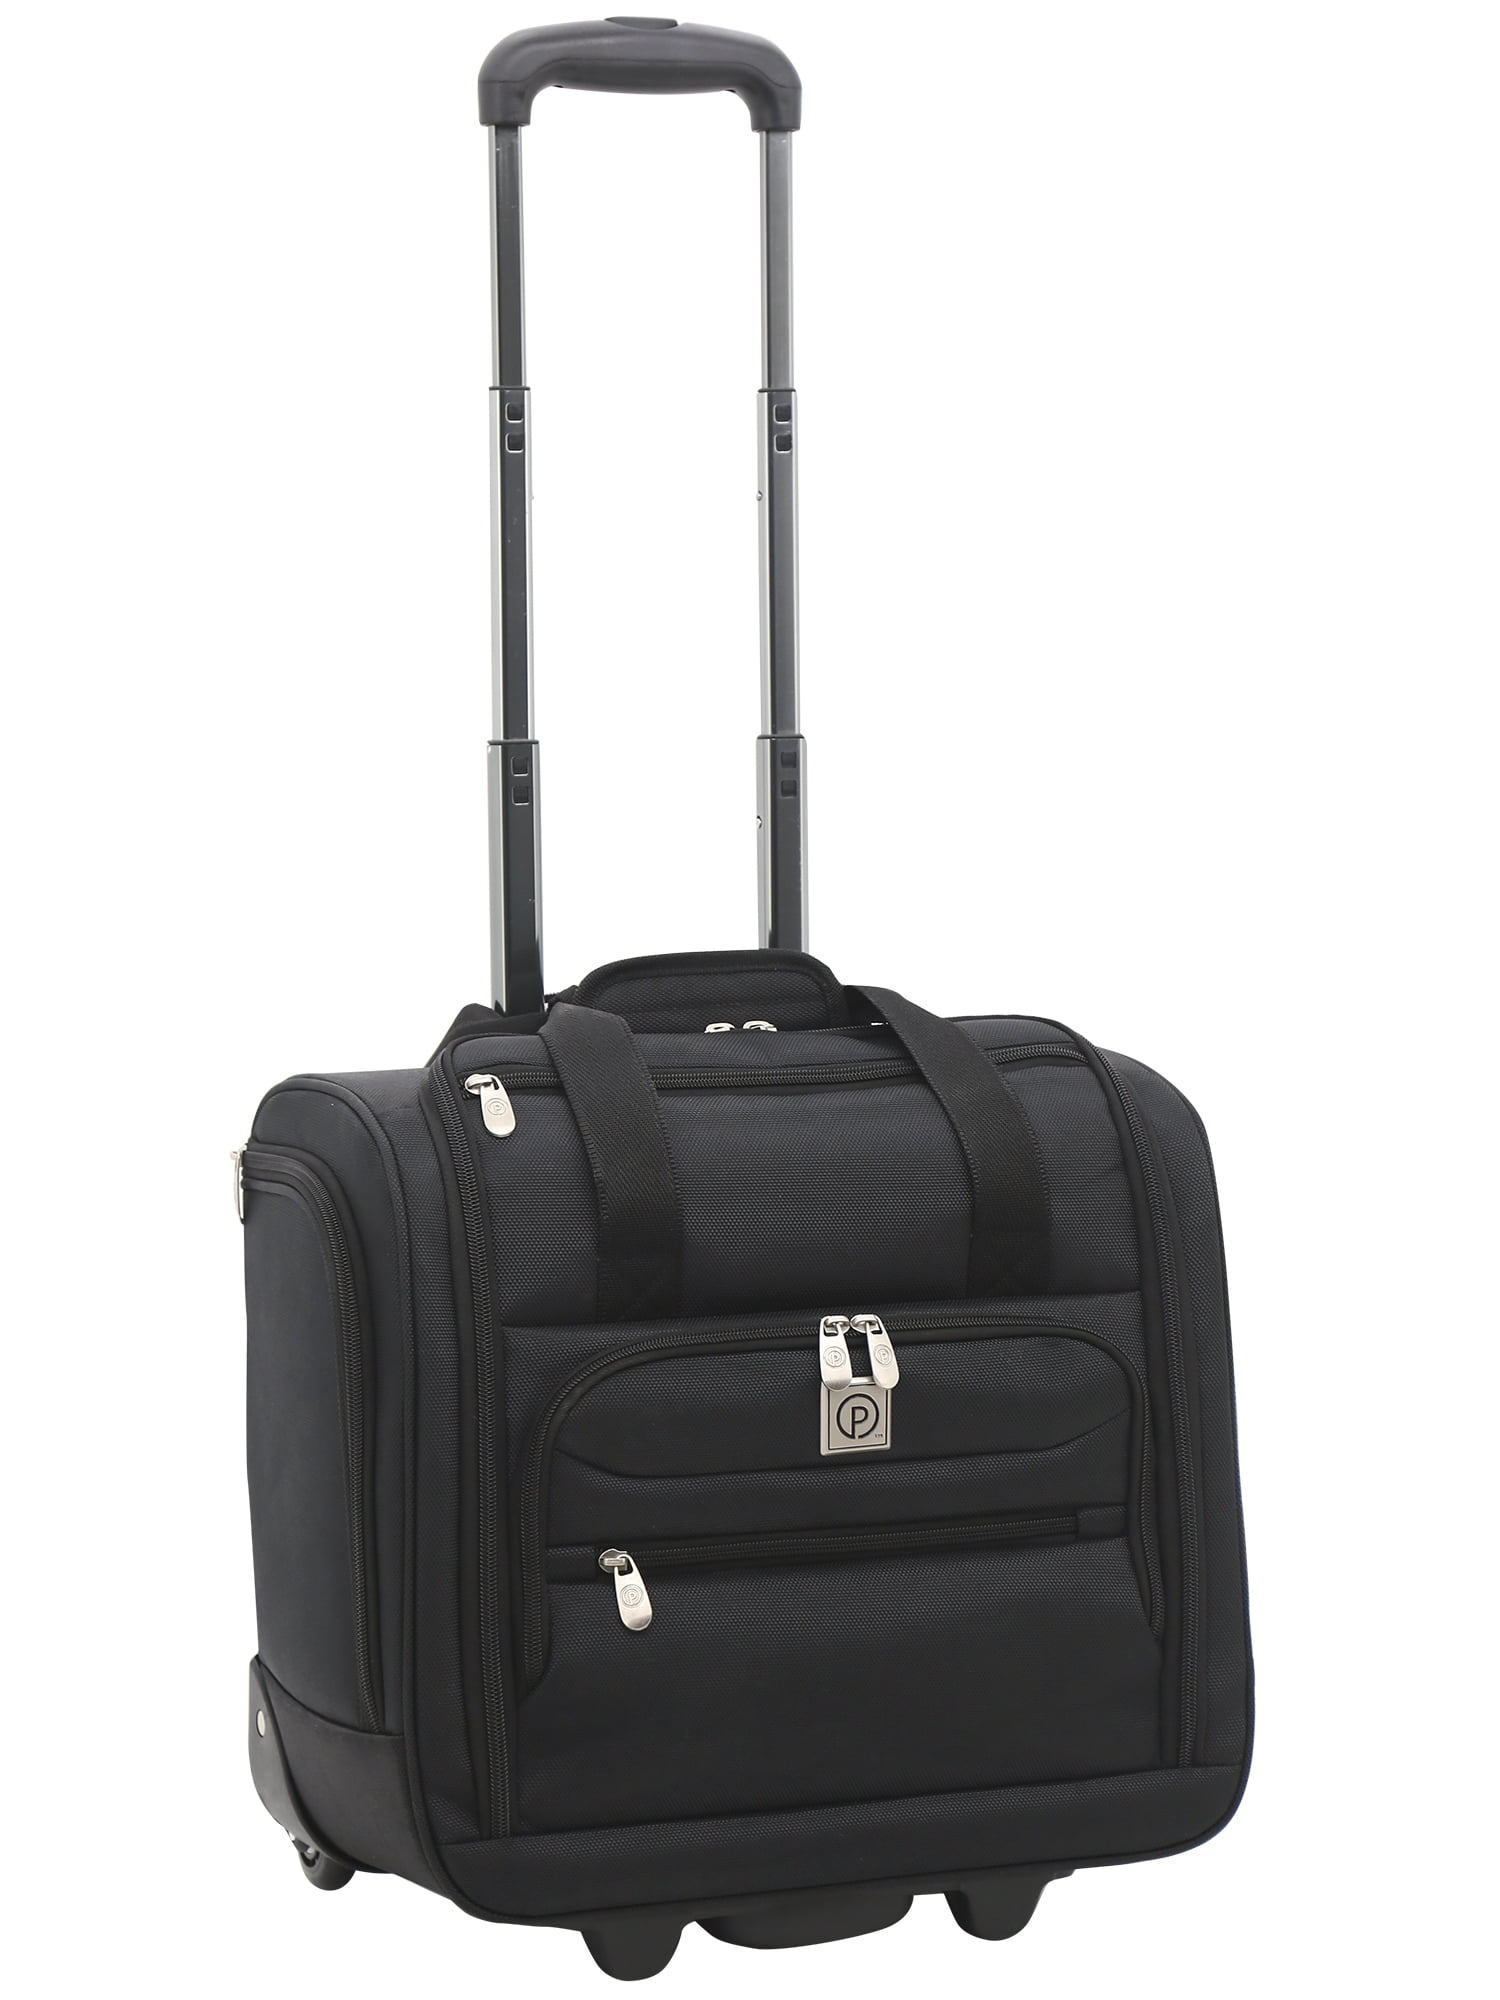 Protege 16" Arendale Rolling Underseater Luggage, Black